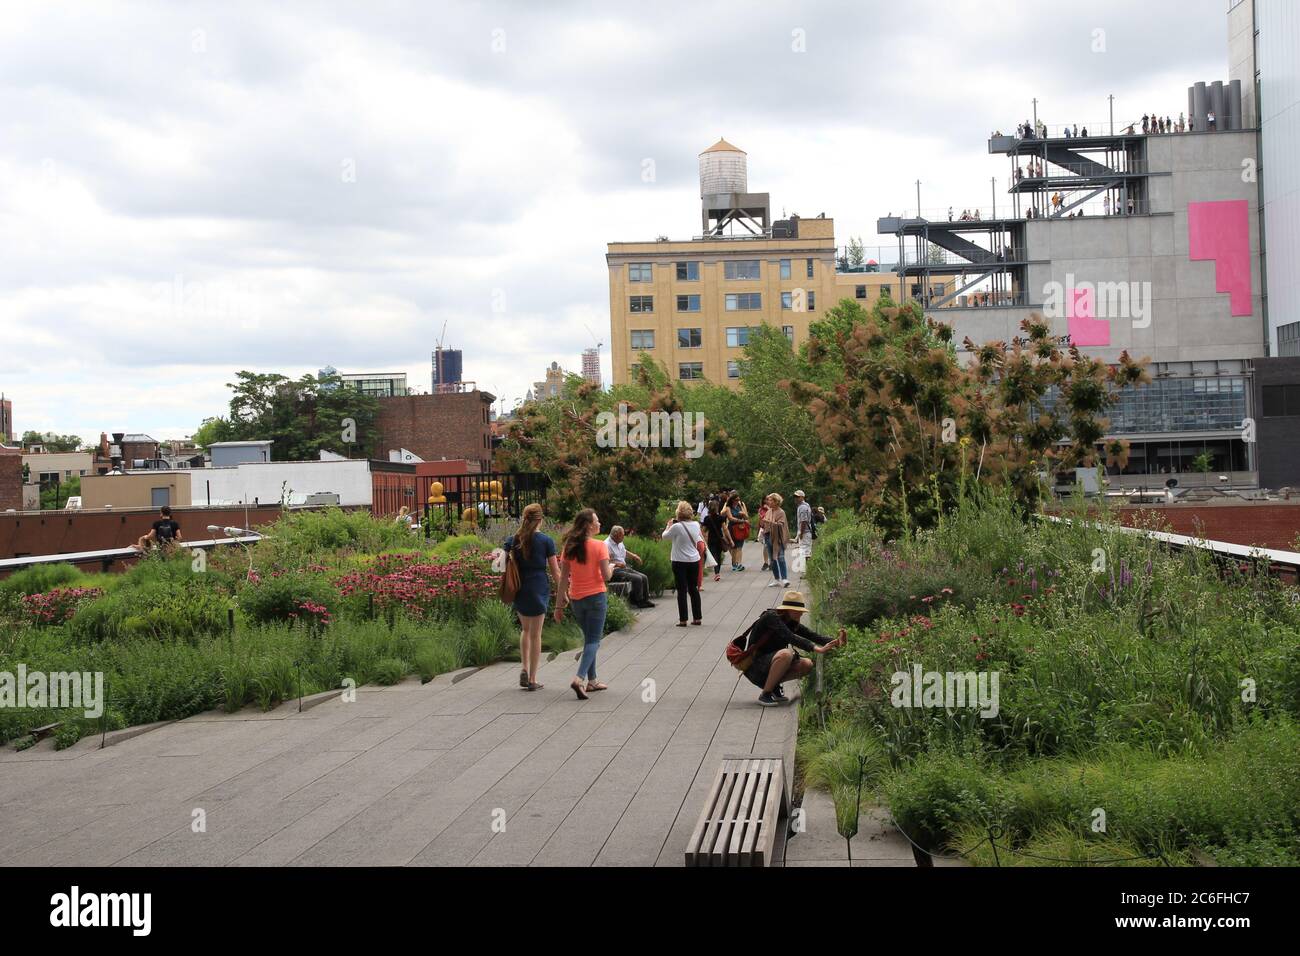 29th June, 2015, scene of people enjoying the surroundings and taking photos of the plants on the High Line park located in New York, USA. Stock Photo